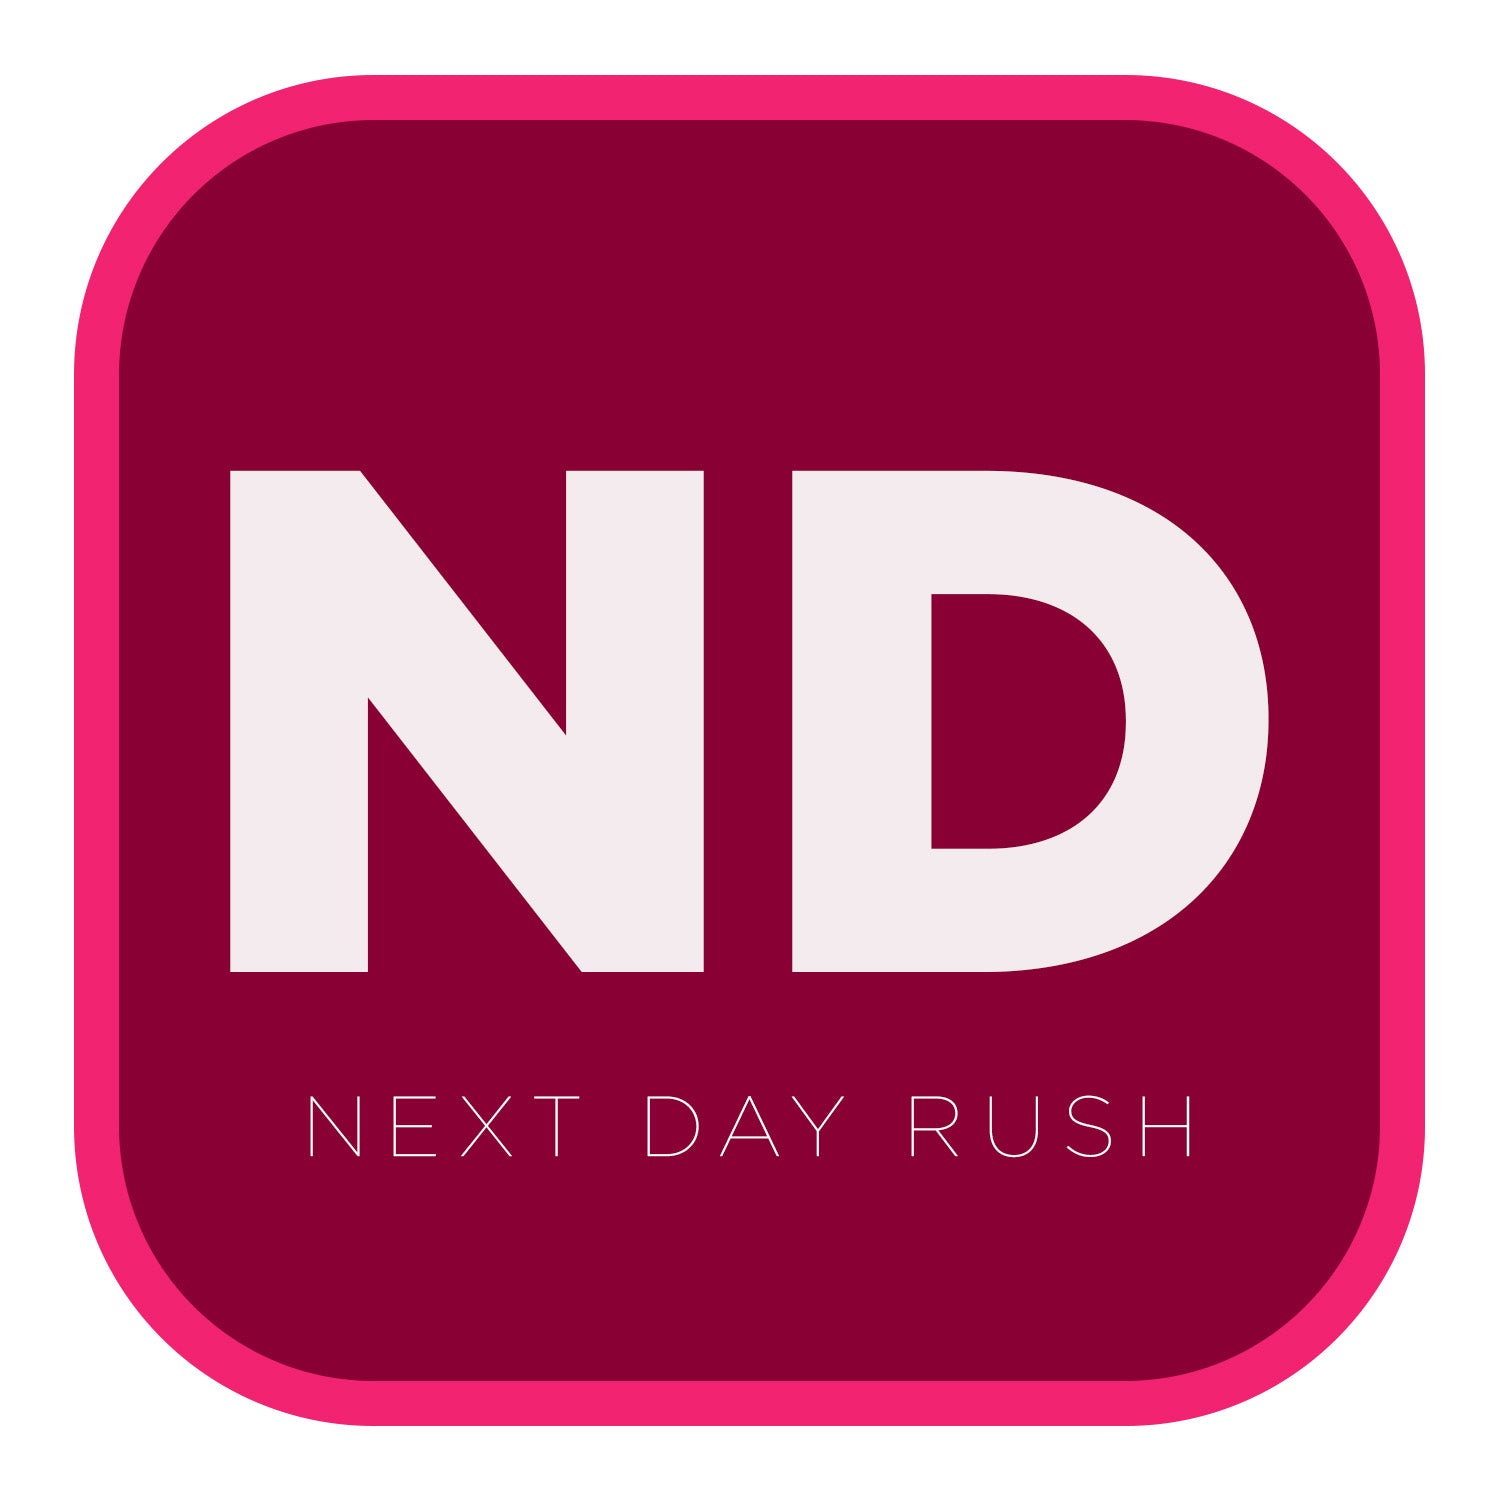 DTF Next Day Rush is available for faster turnaround time on DTF Transfers.